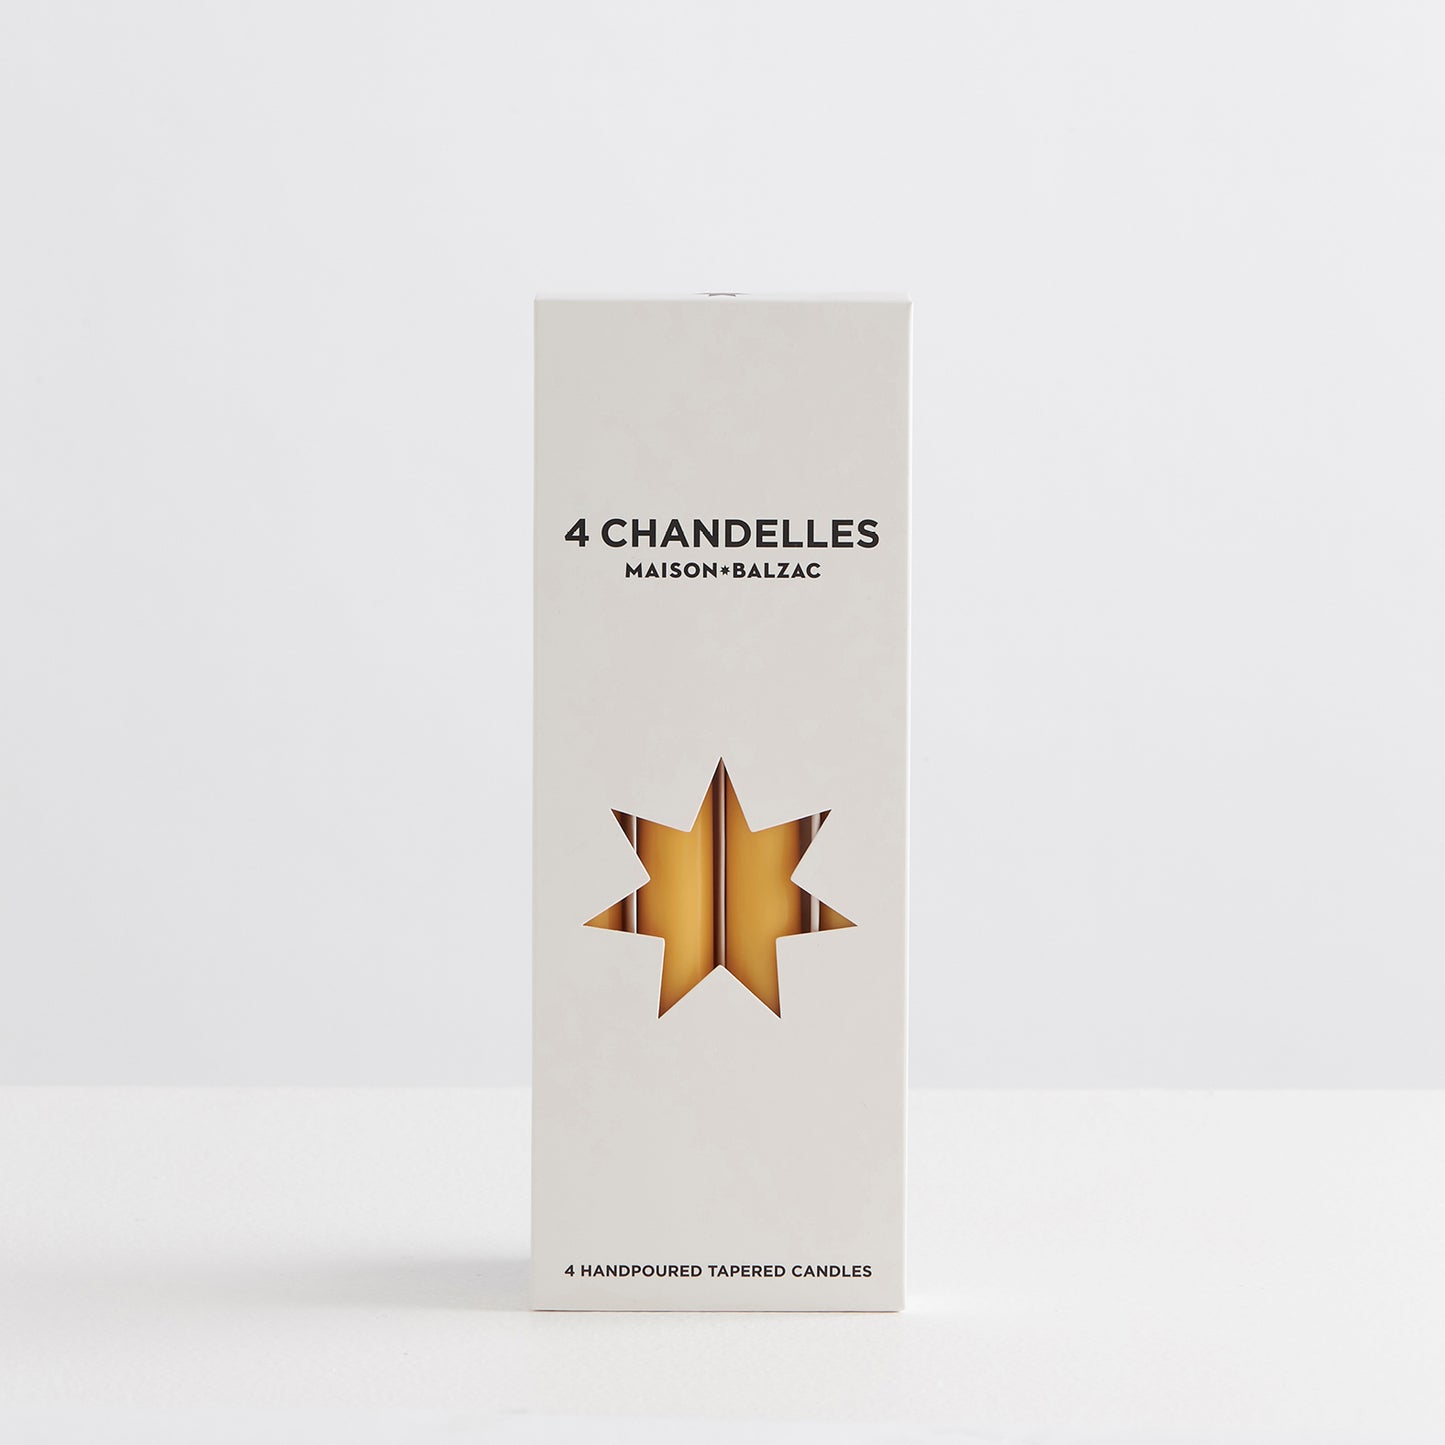 Maison Balzac 4 Chandelles Tapered Candles - Miel